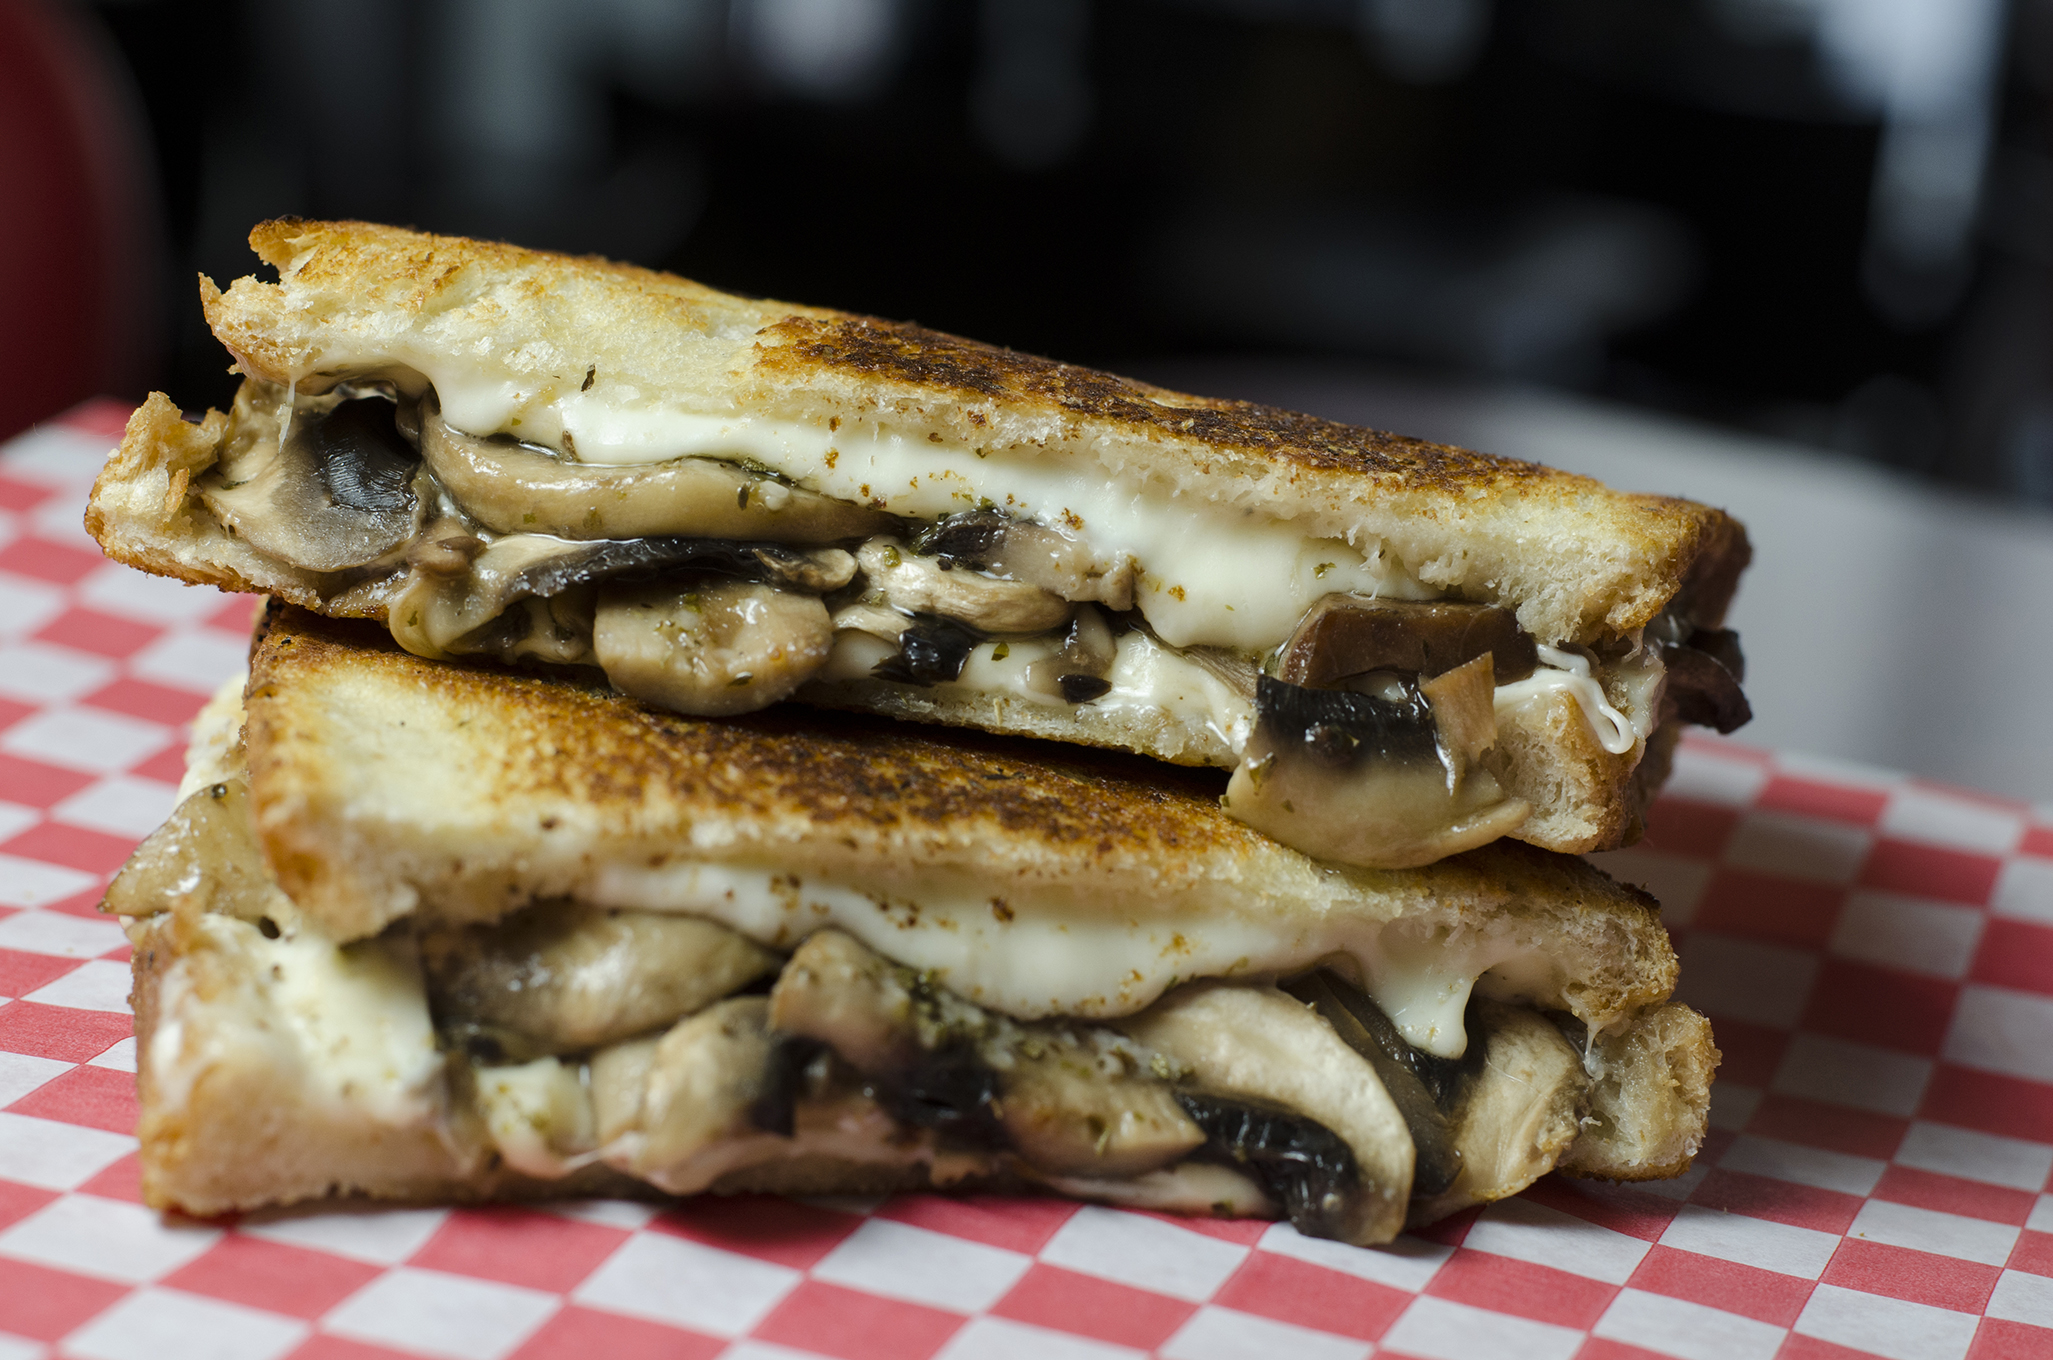 The Stuffed Mushroom Melt from Toastys in downtown Windsor, Ontario.